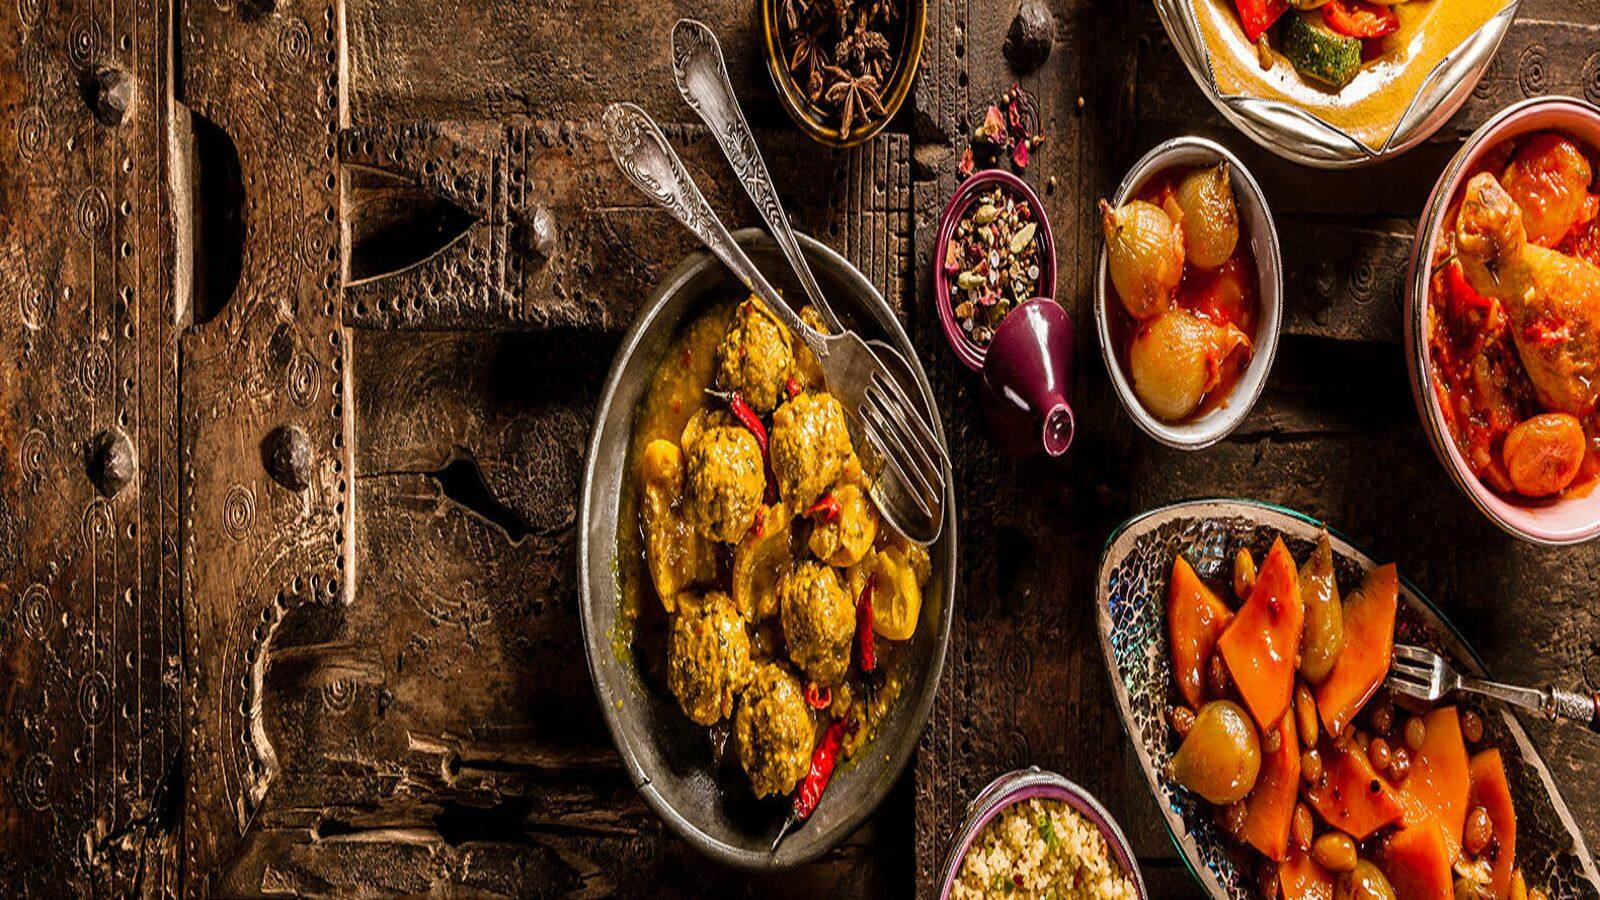 Flavors of Marrakech: Dishes to eat in this Moroccan city